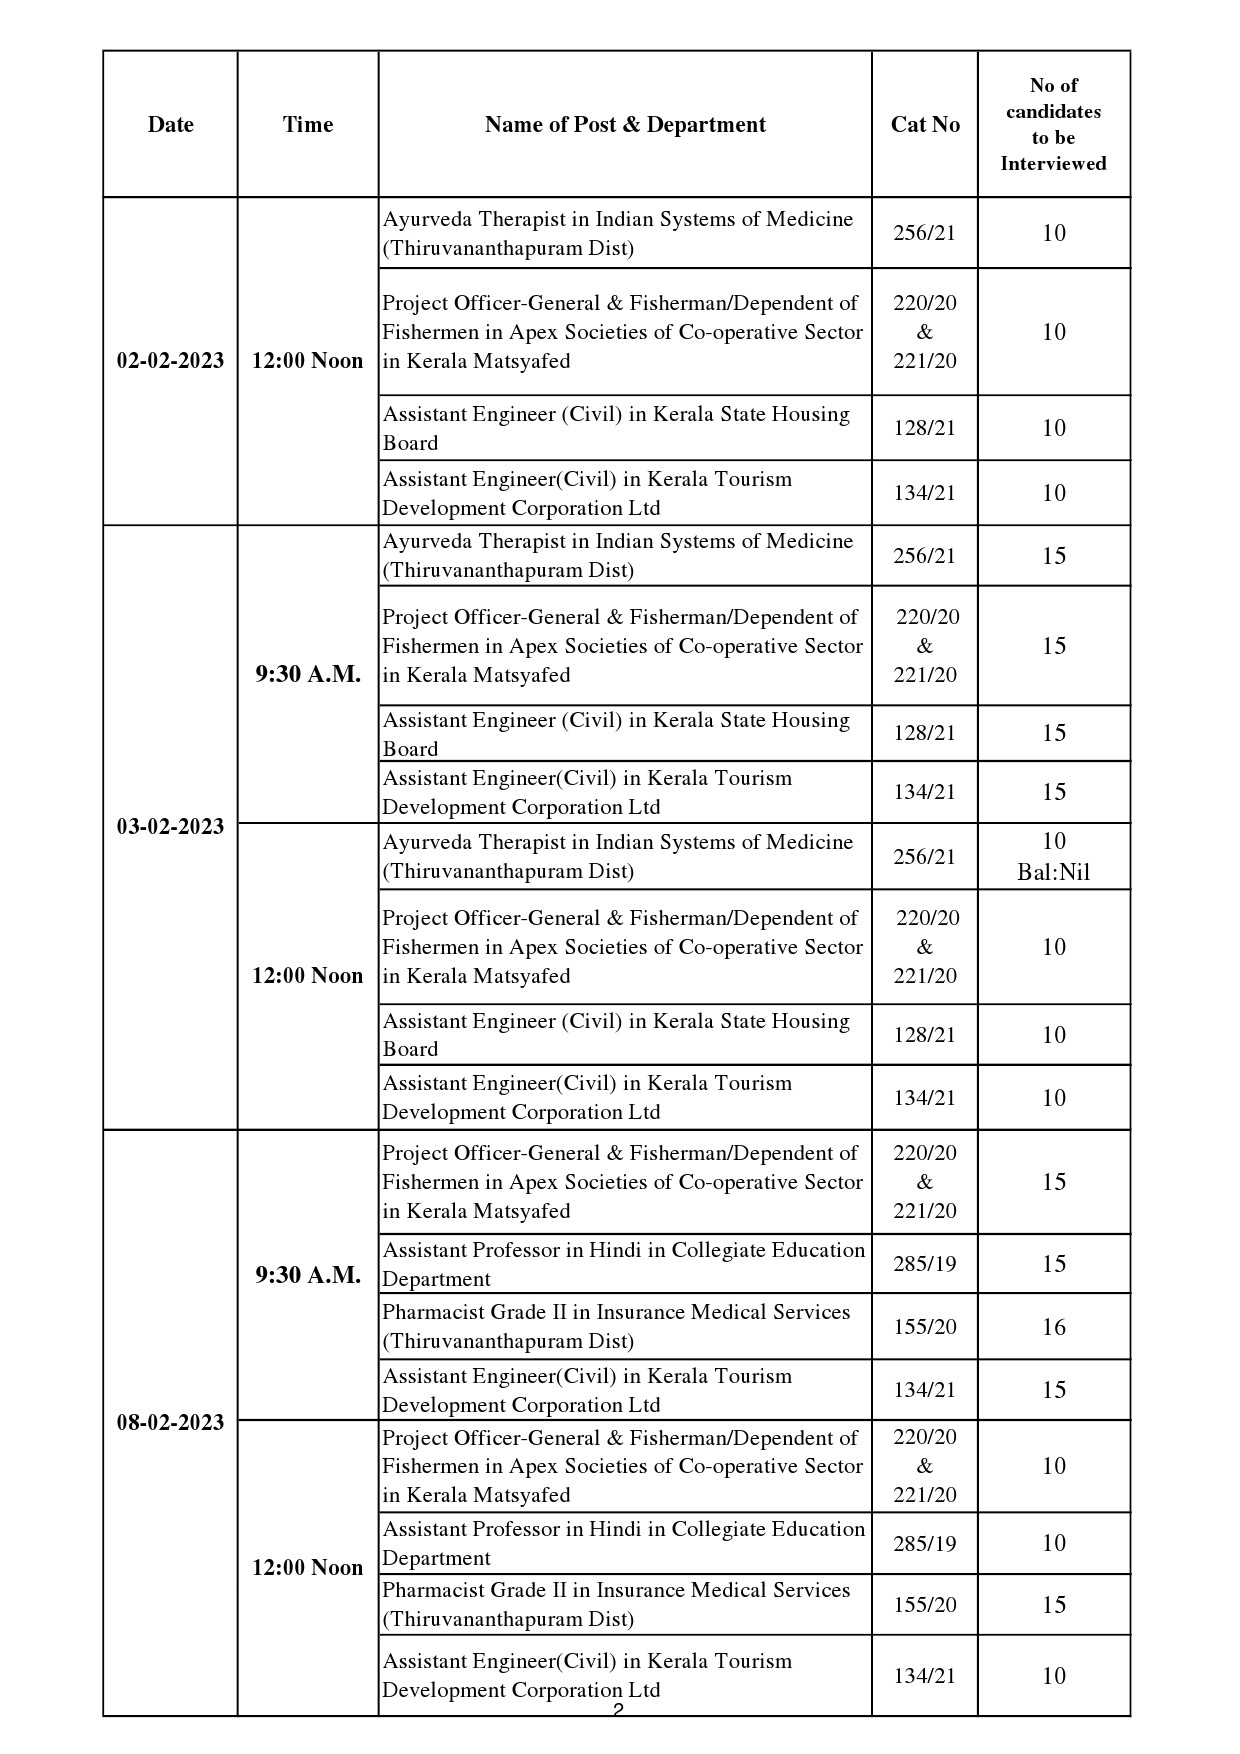 KPSC Revised Interview Programme For February 2023 - Notification Image 2